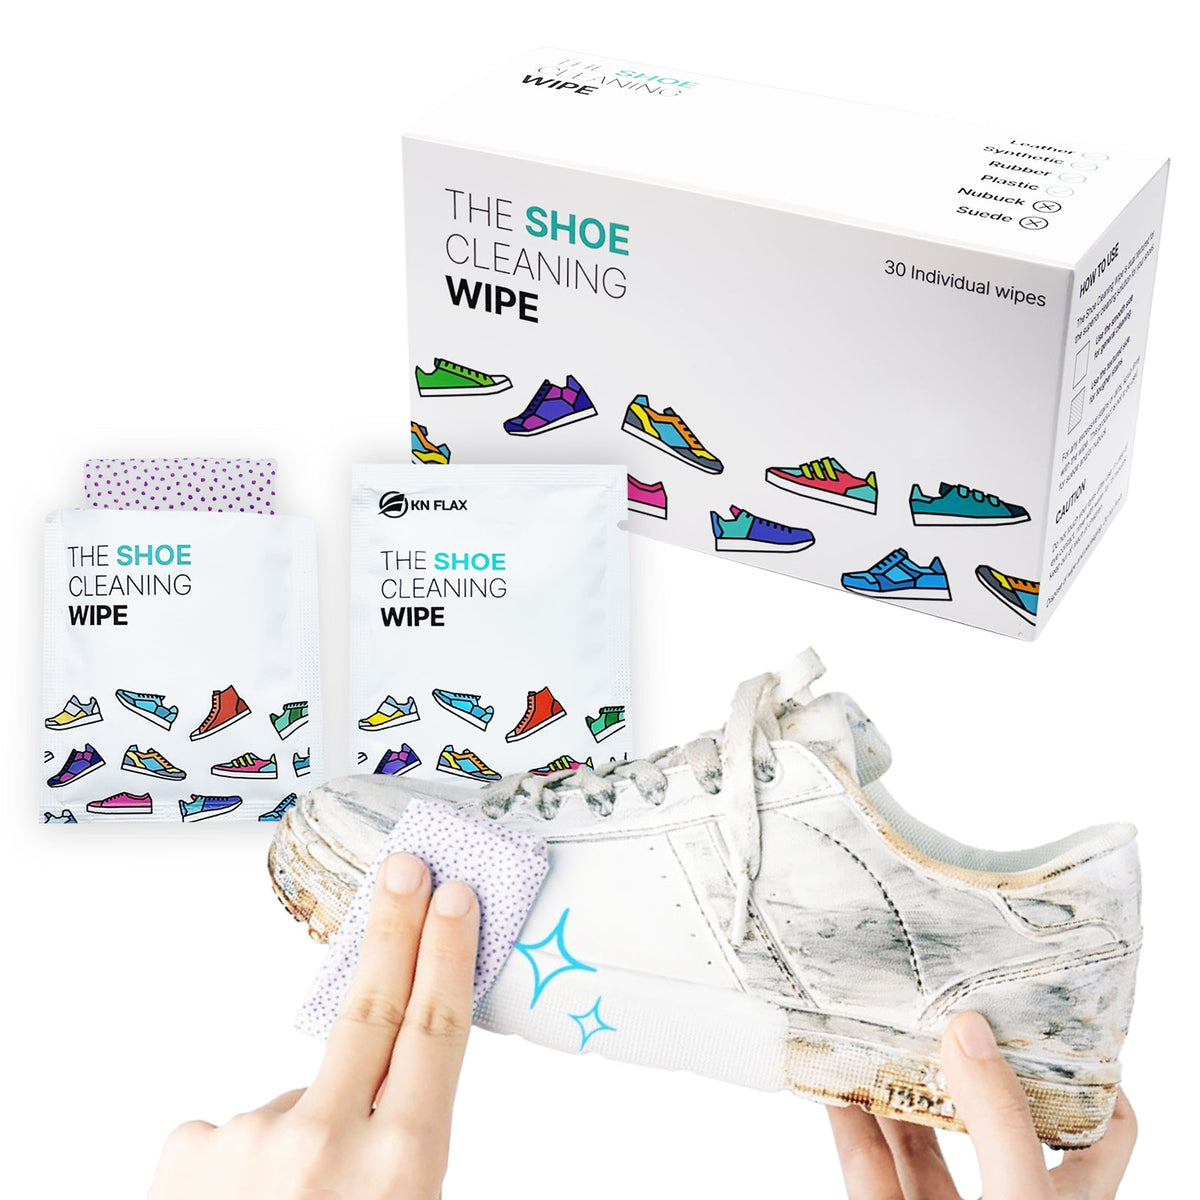 30pcs] The Shoe Cleaning Wipe  Microdotted Wipe On the Go - KN FLAX Shoe  Care Kits